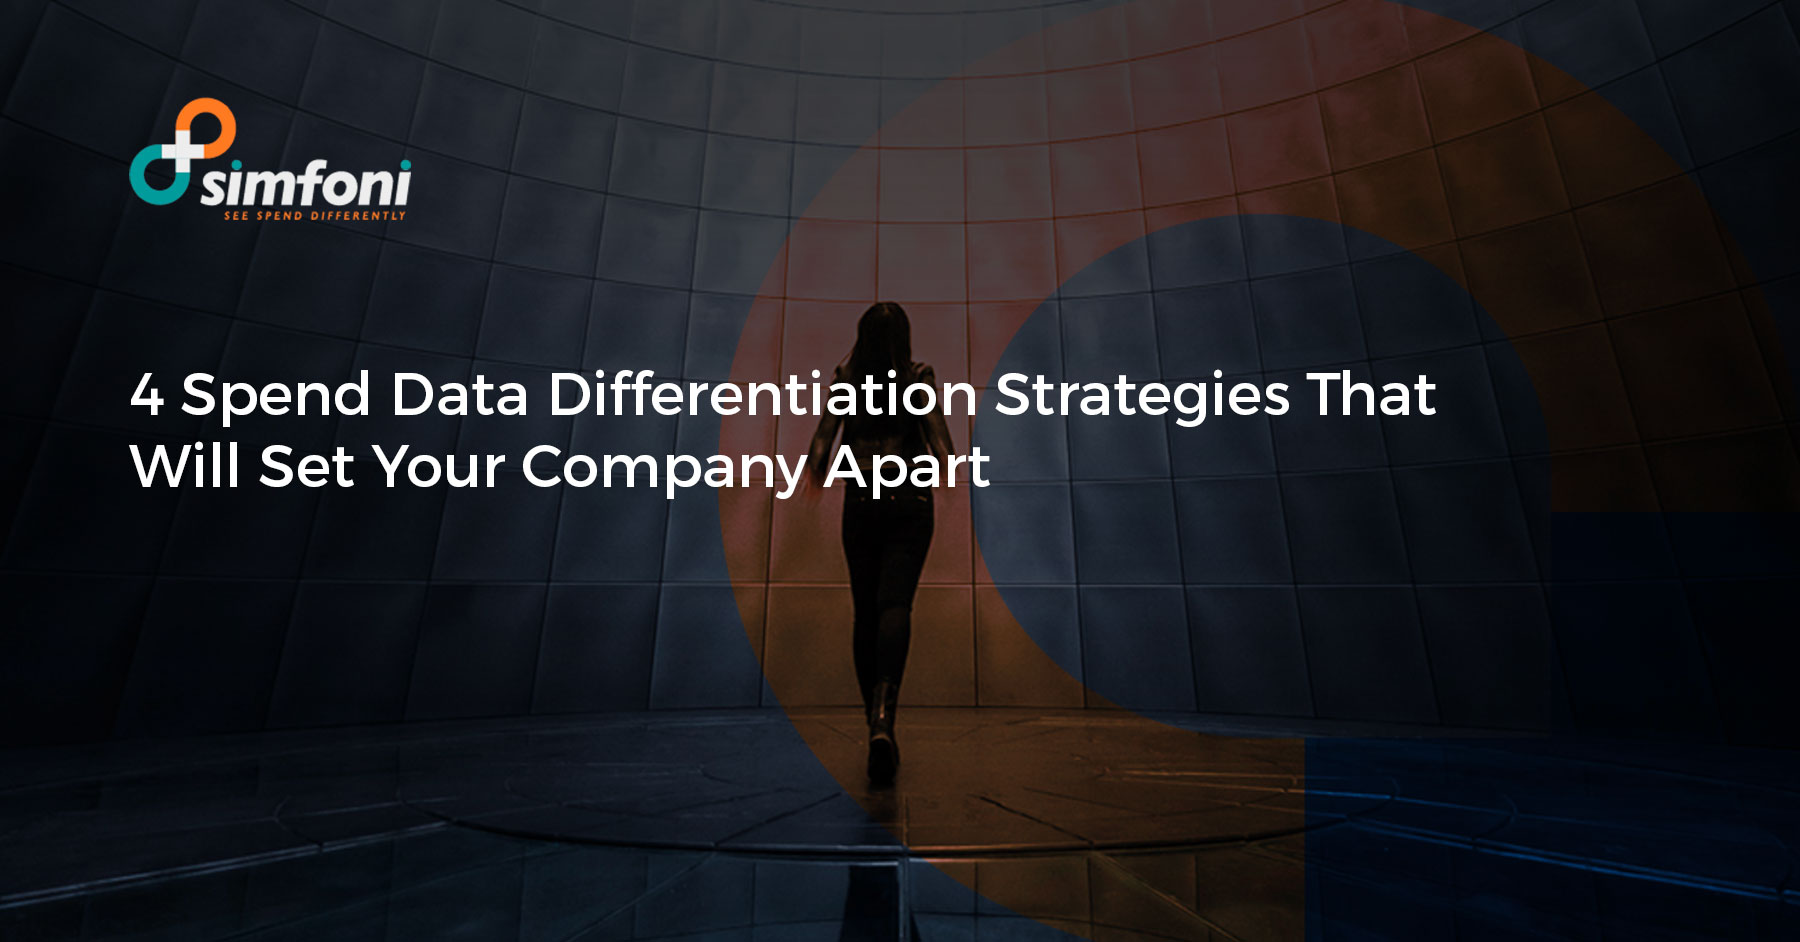 4 Spend Data Differentiation Strategies That Will Set Your Company Apart